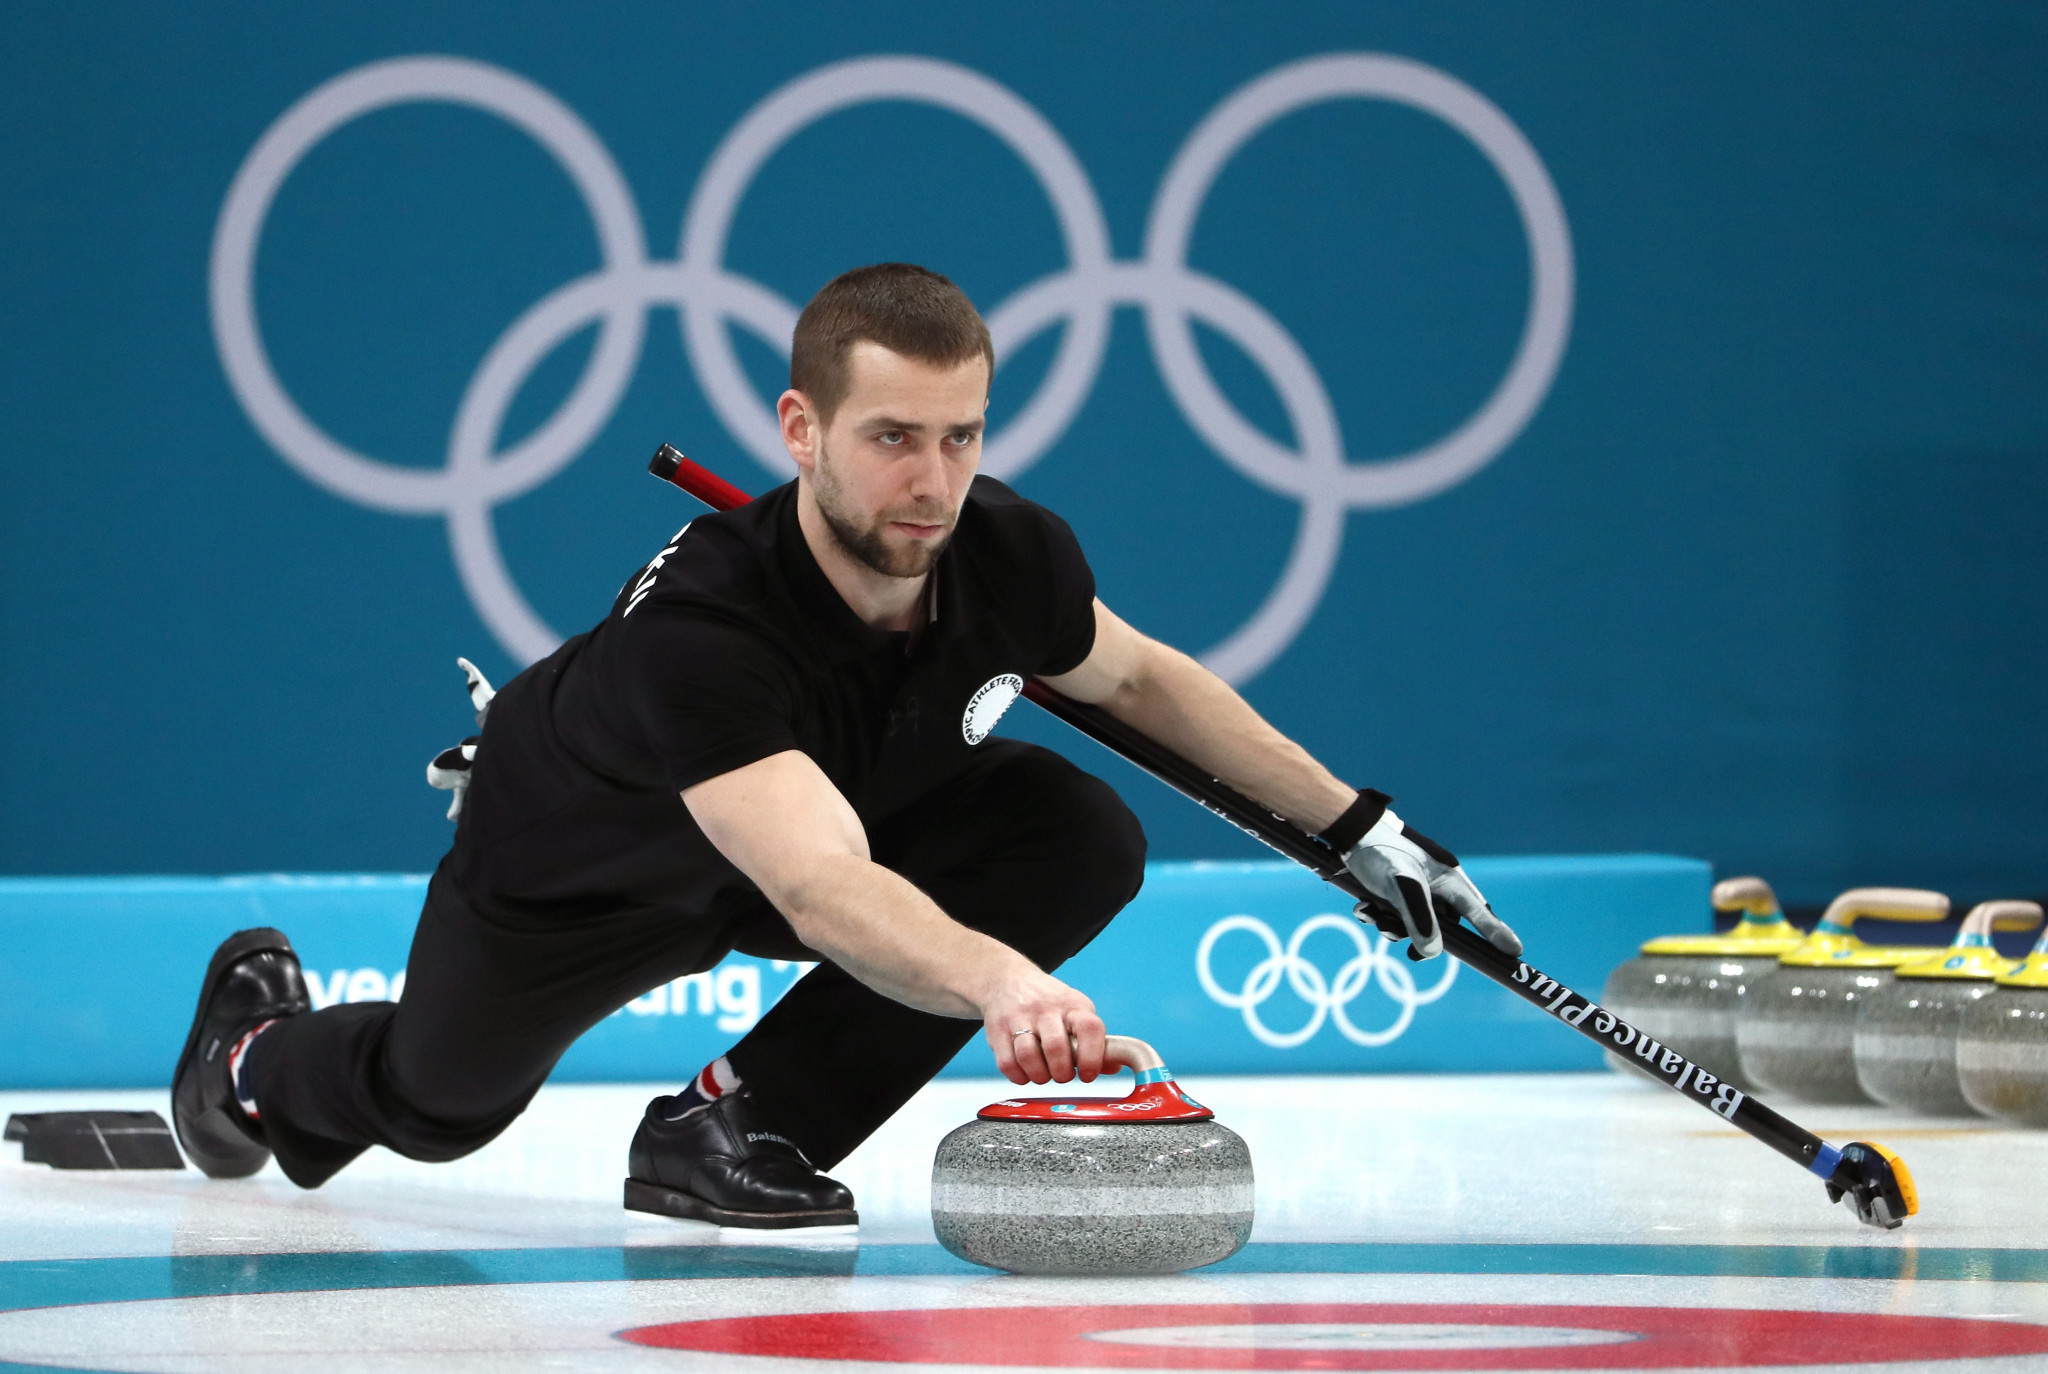  Aleksandr Krushelnitckii is expected to resume his curling career in 2022 ©Getty Images